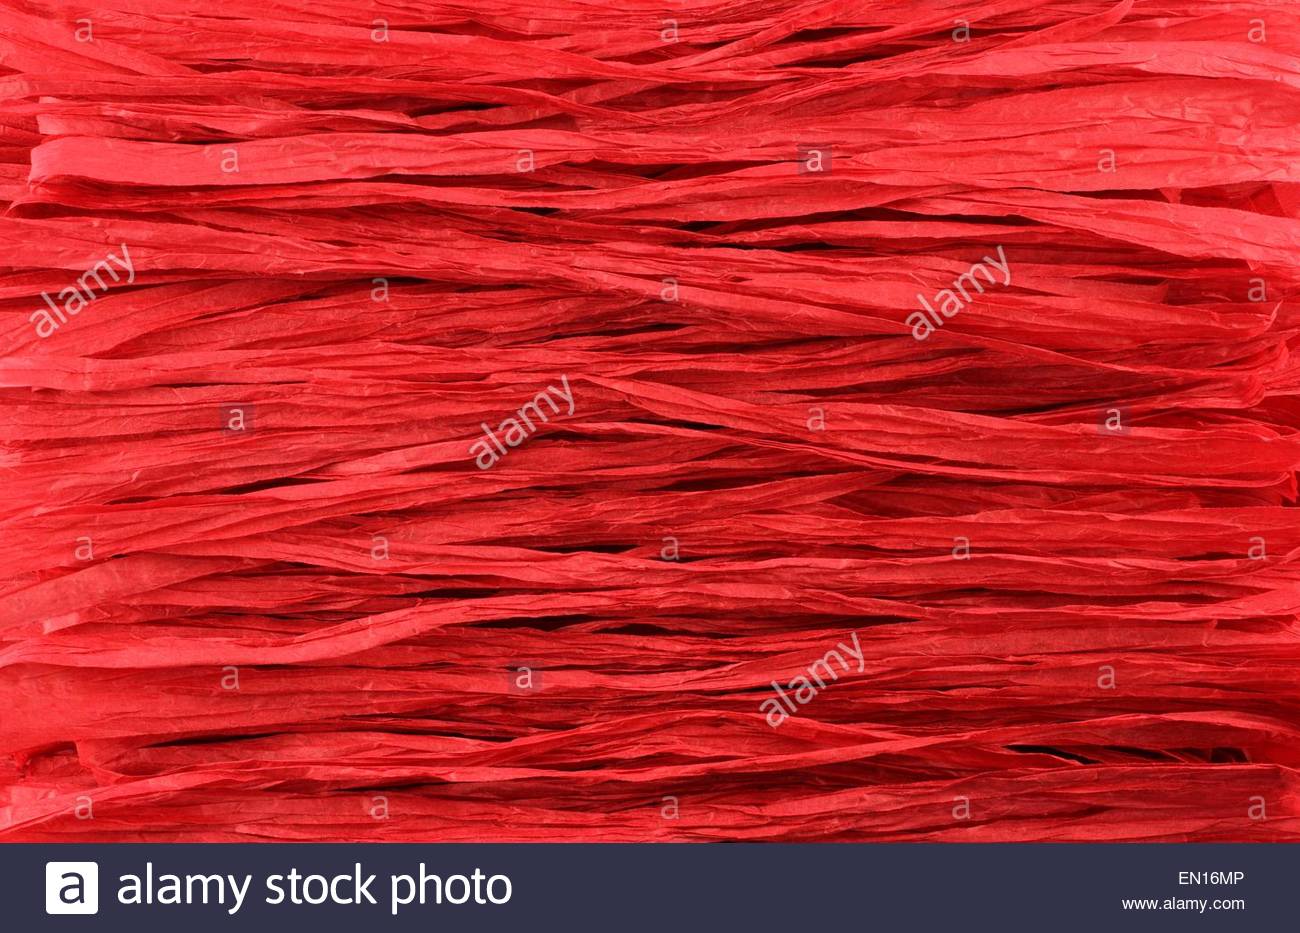 Background Red Paper Raffia Strips Situated In Parallel Lines